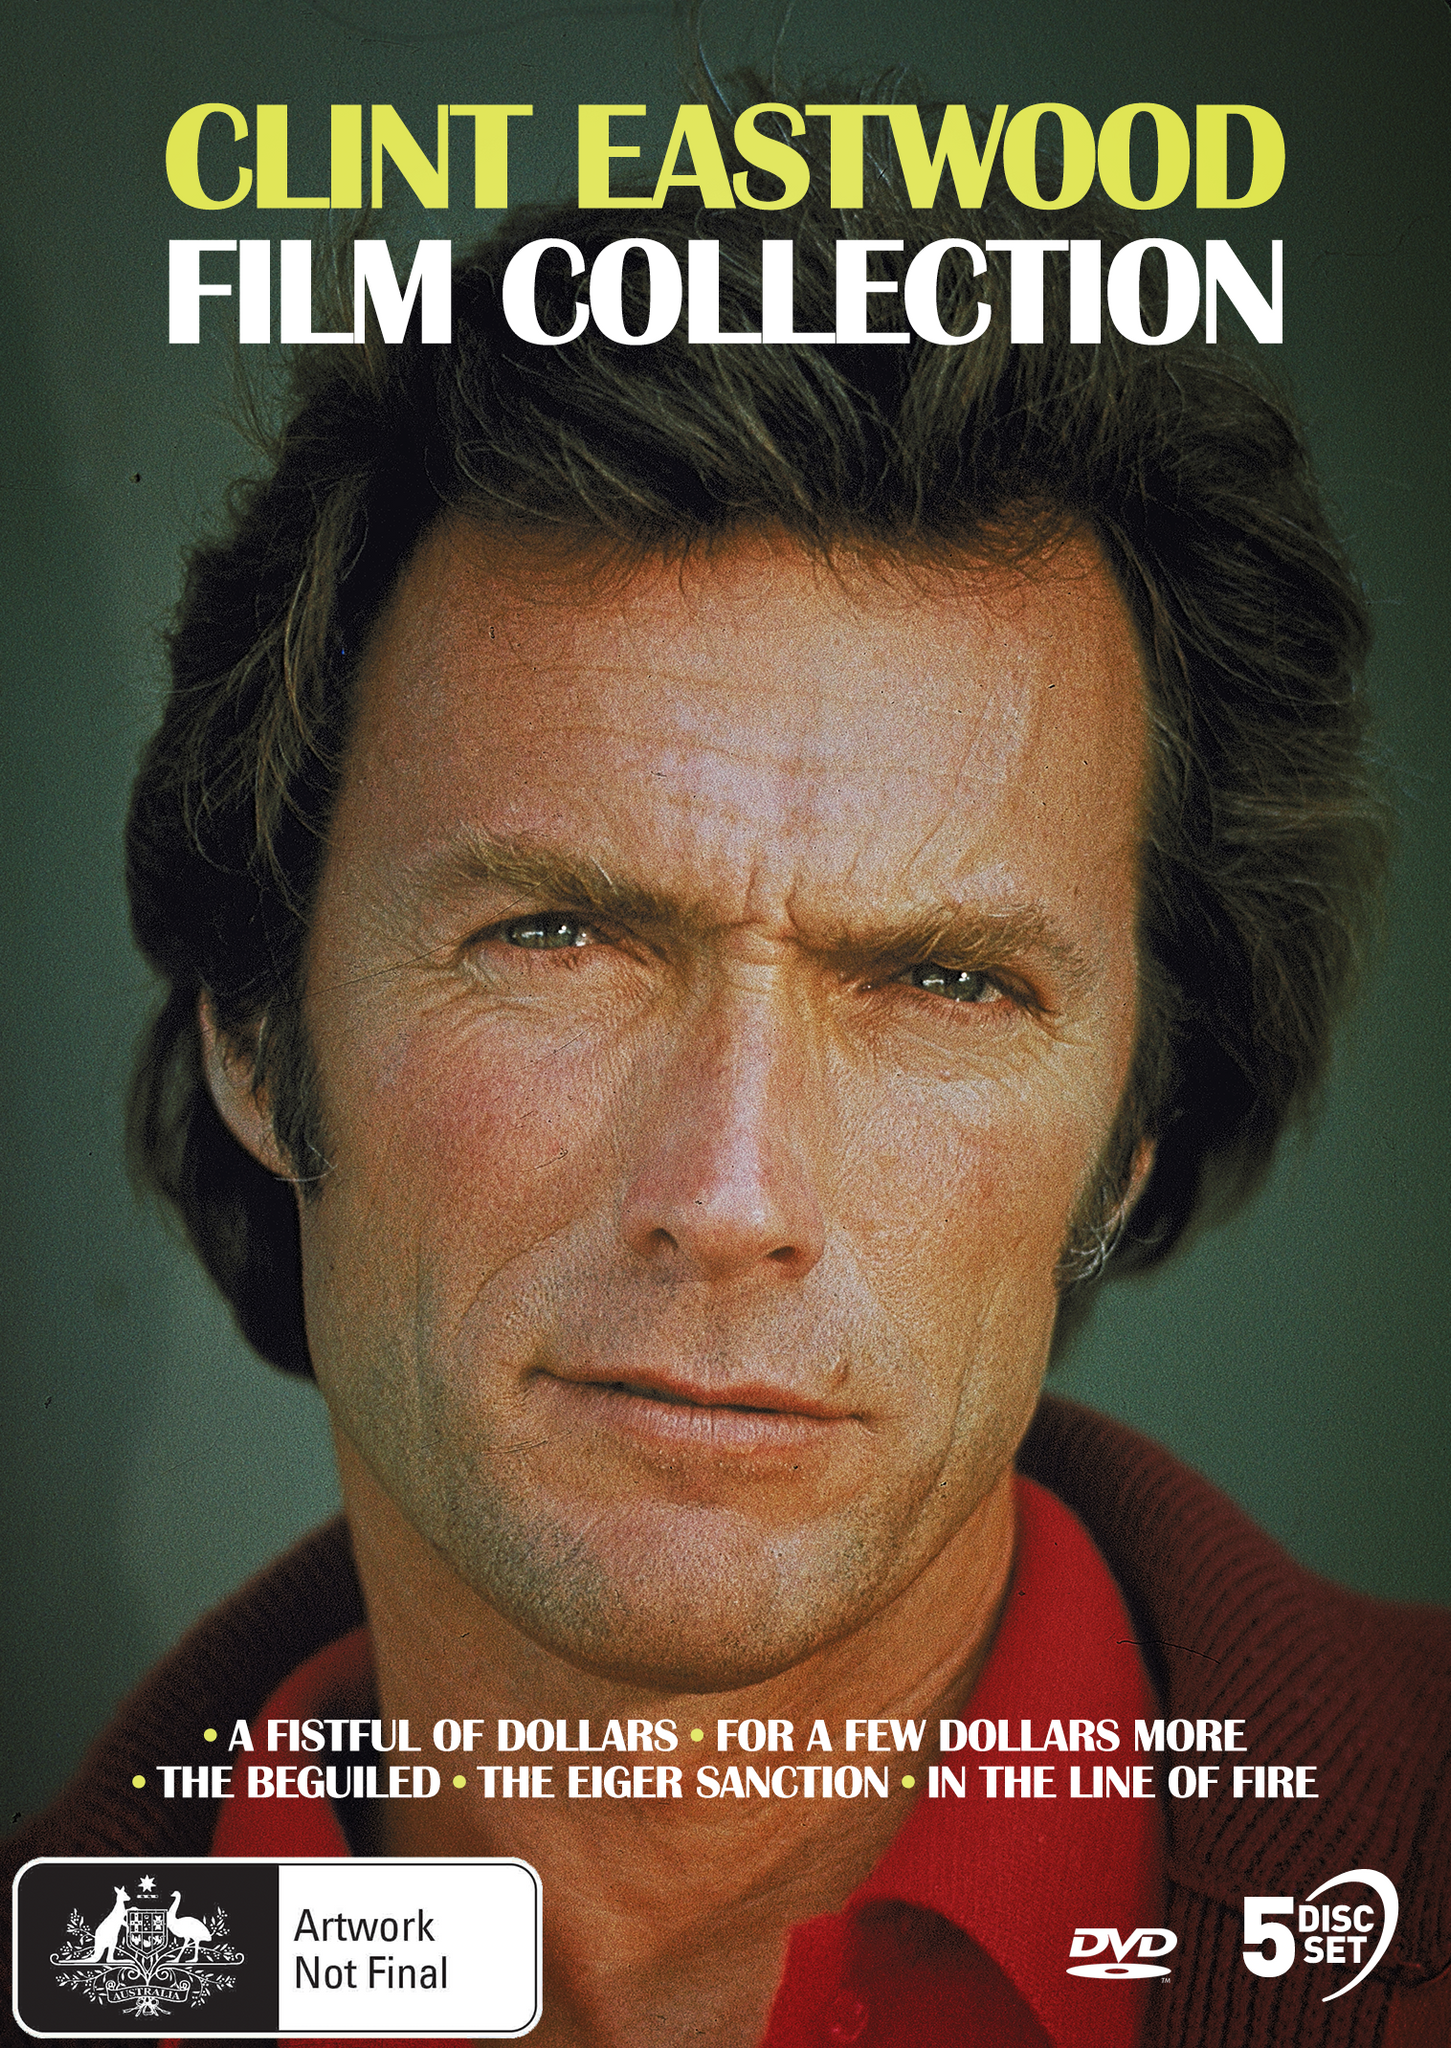 CLINT EASTWOOD: FILM COLLECTION (A FISTFUL OF DOLLARS / FOR A FEW DOLLARS MORE / THE BEGUILED / THE EIGER SANCTION / IN THE LINE OF FIRE)